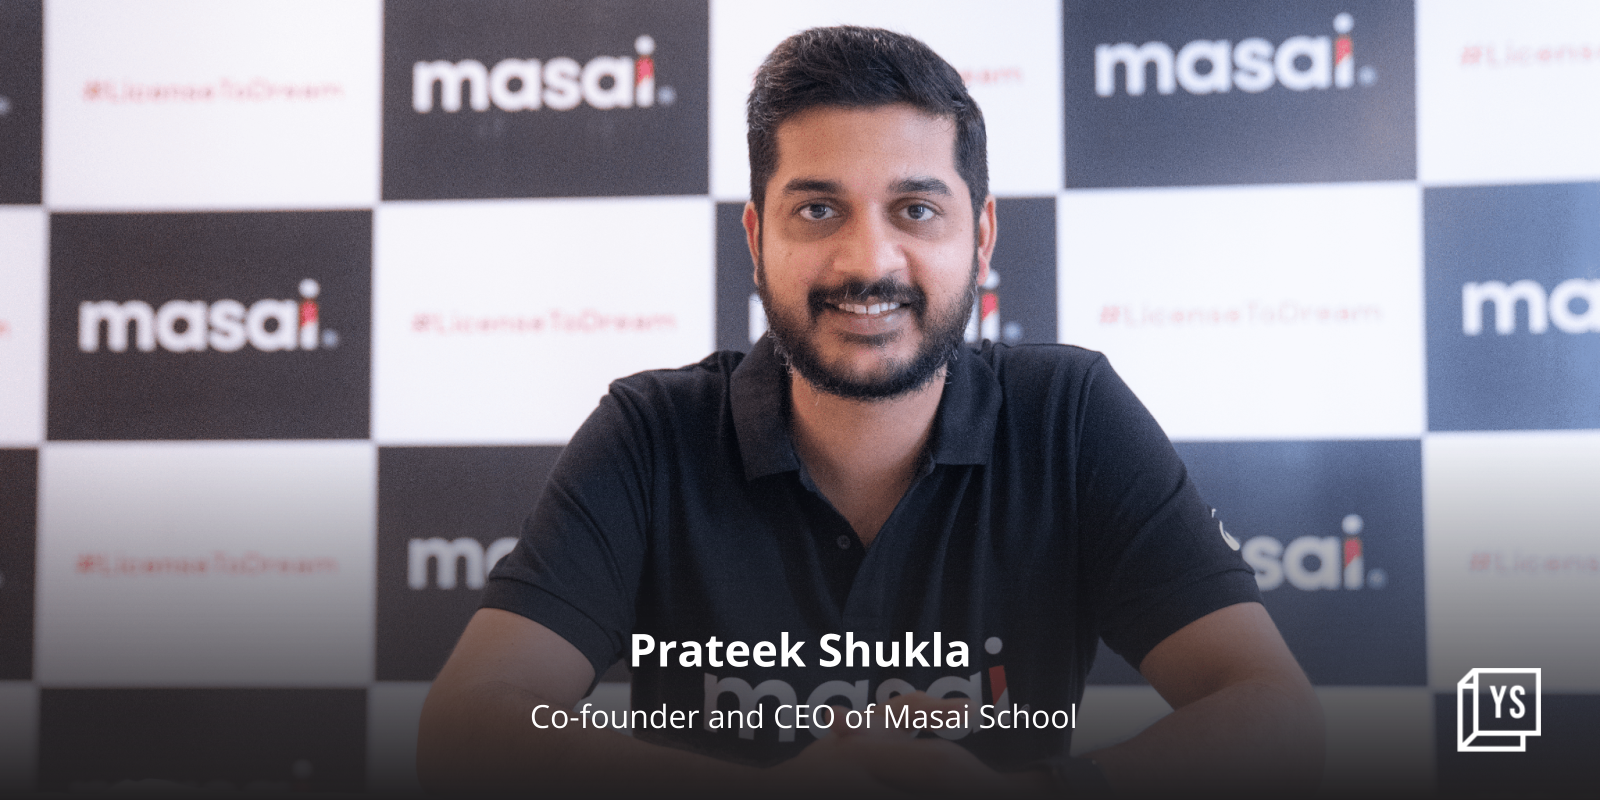 Masai School’s AI-powered hiring platform aims to connect tech talent with job opportunities